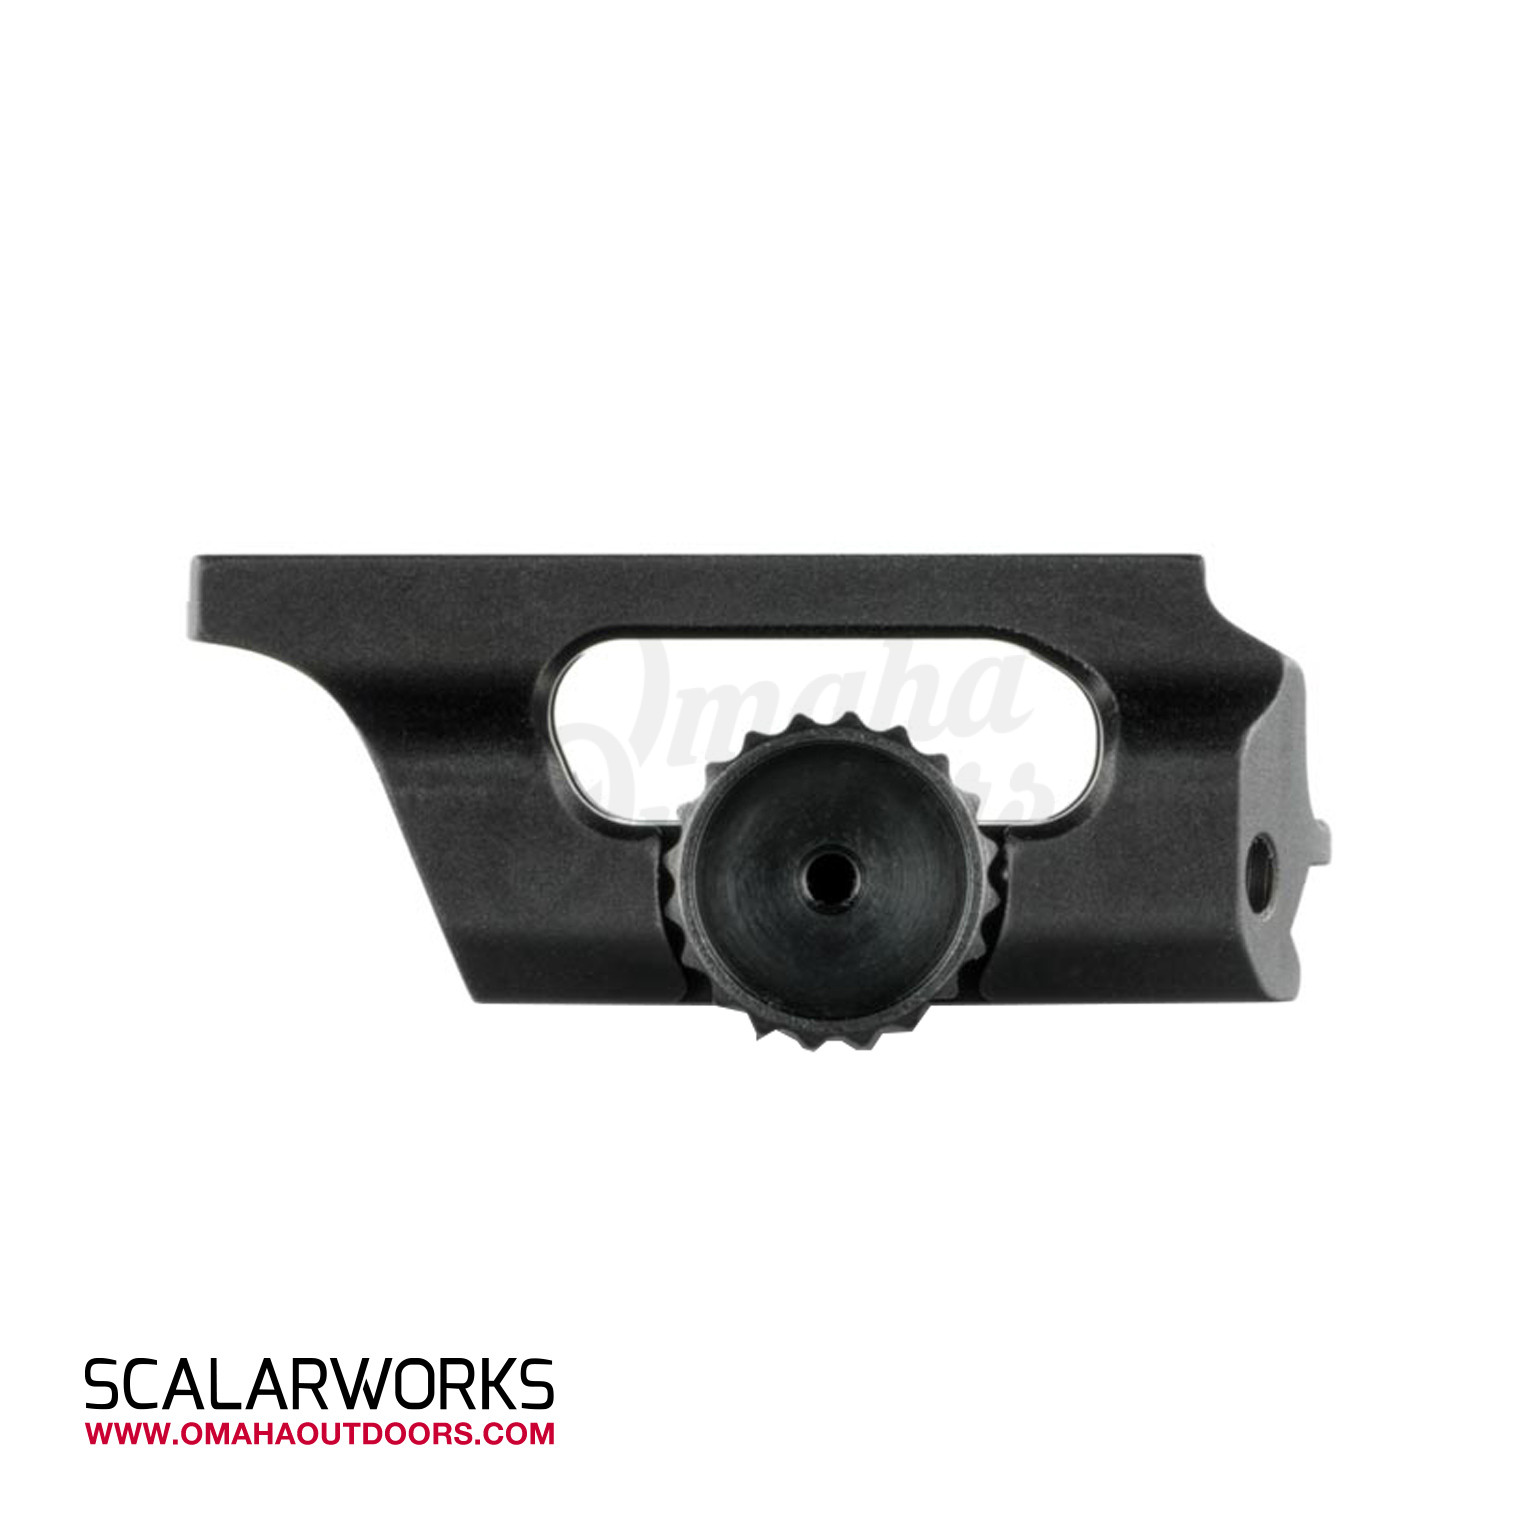 SCALARWORKS LEAP 10 Aimpoint Duty RDS Mount 1.57 - Free Shipping